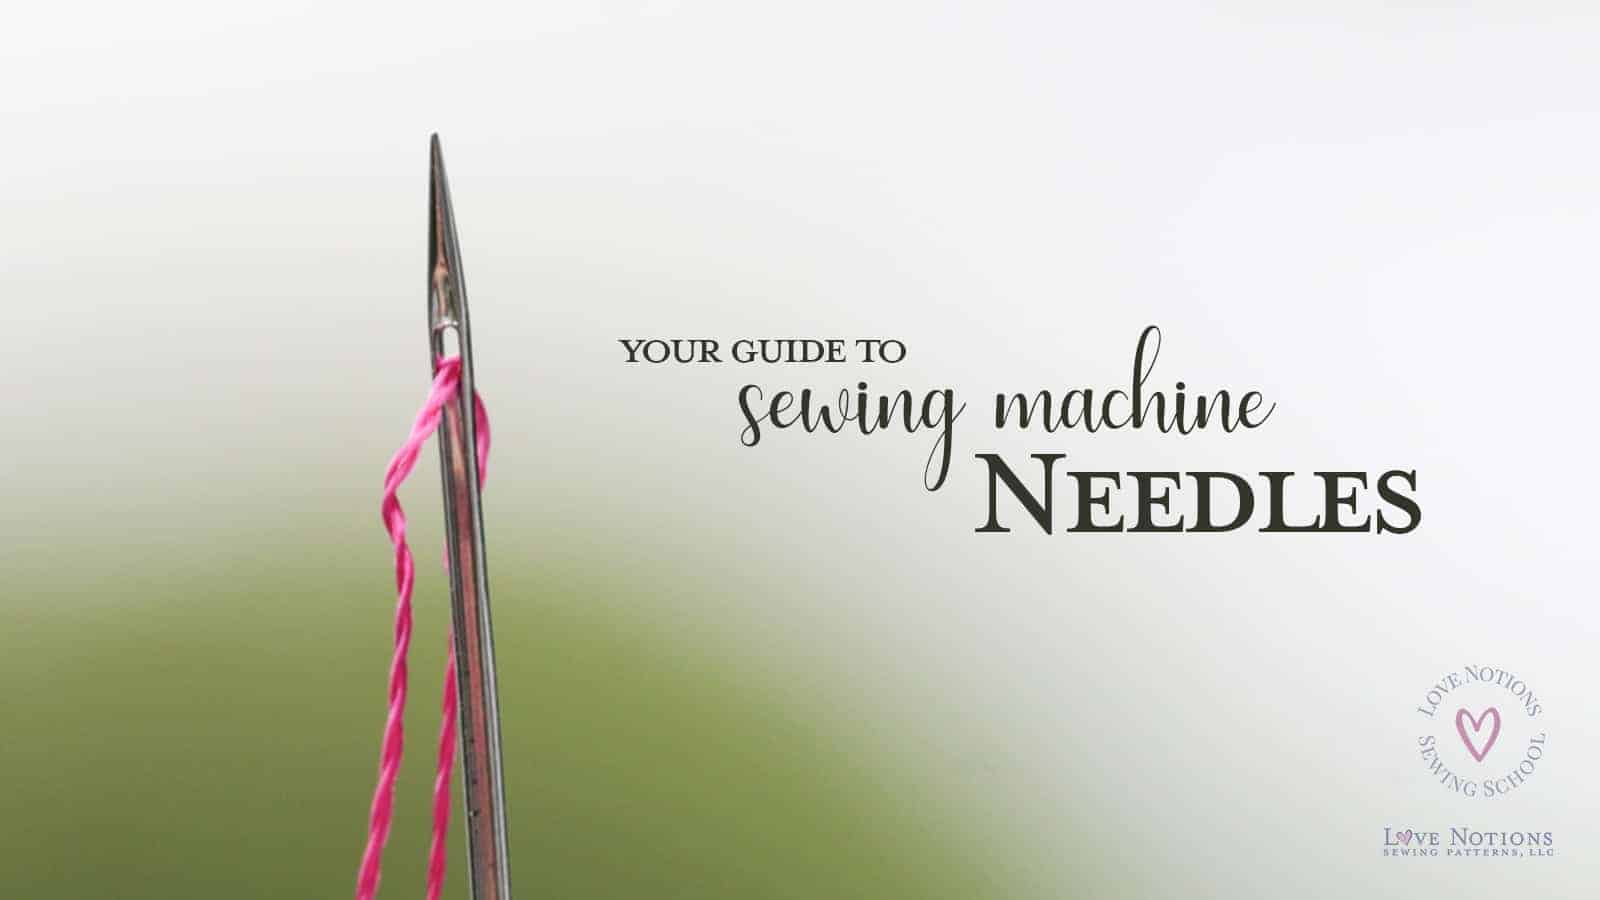 Machine Needles 101: Let’s get to the Point